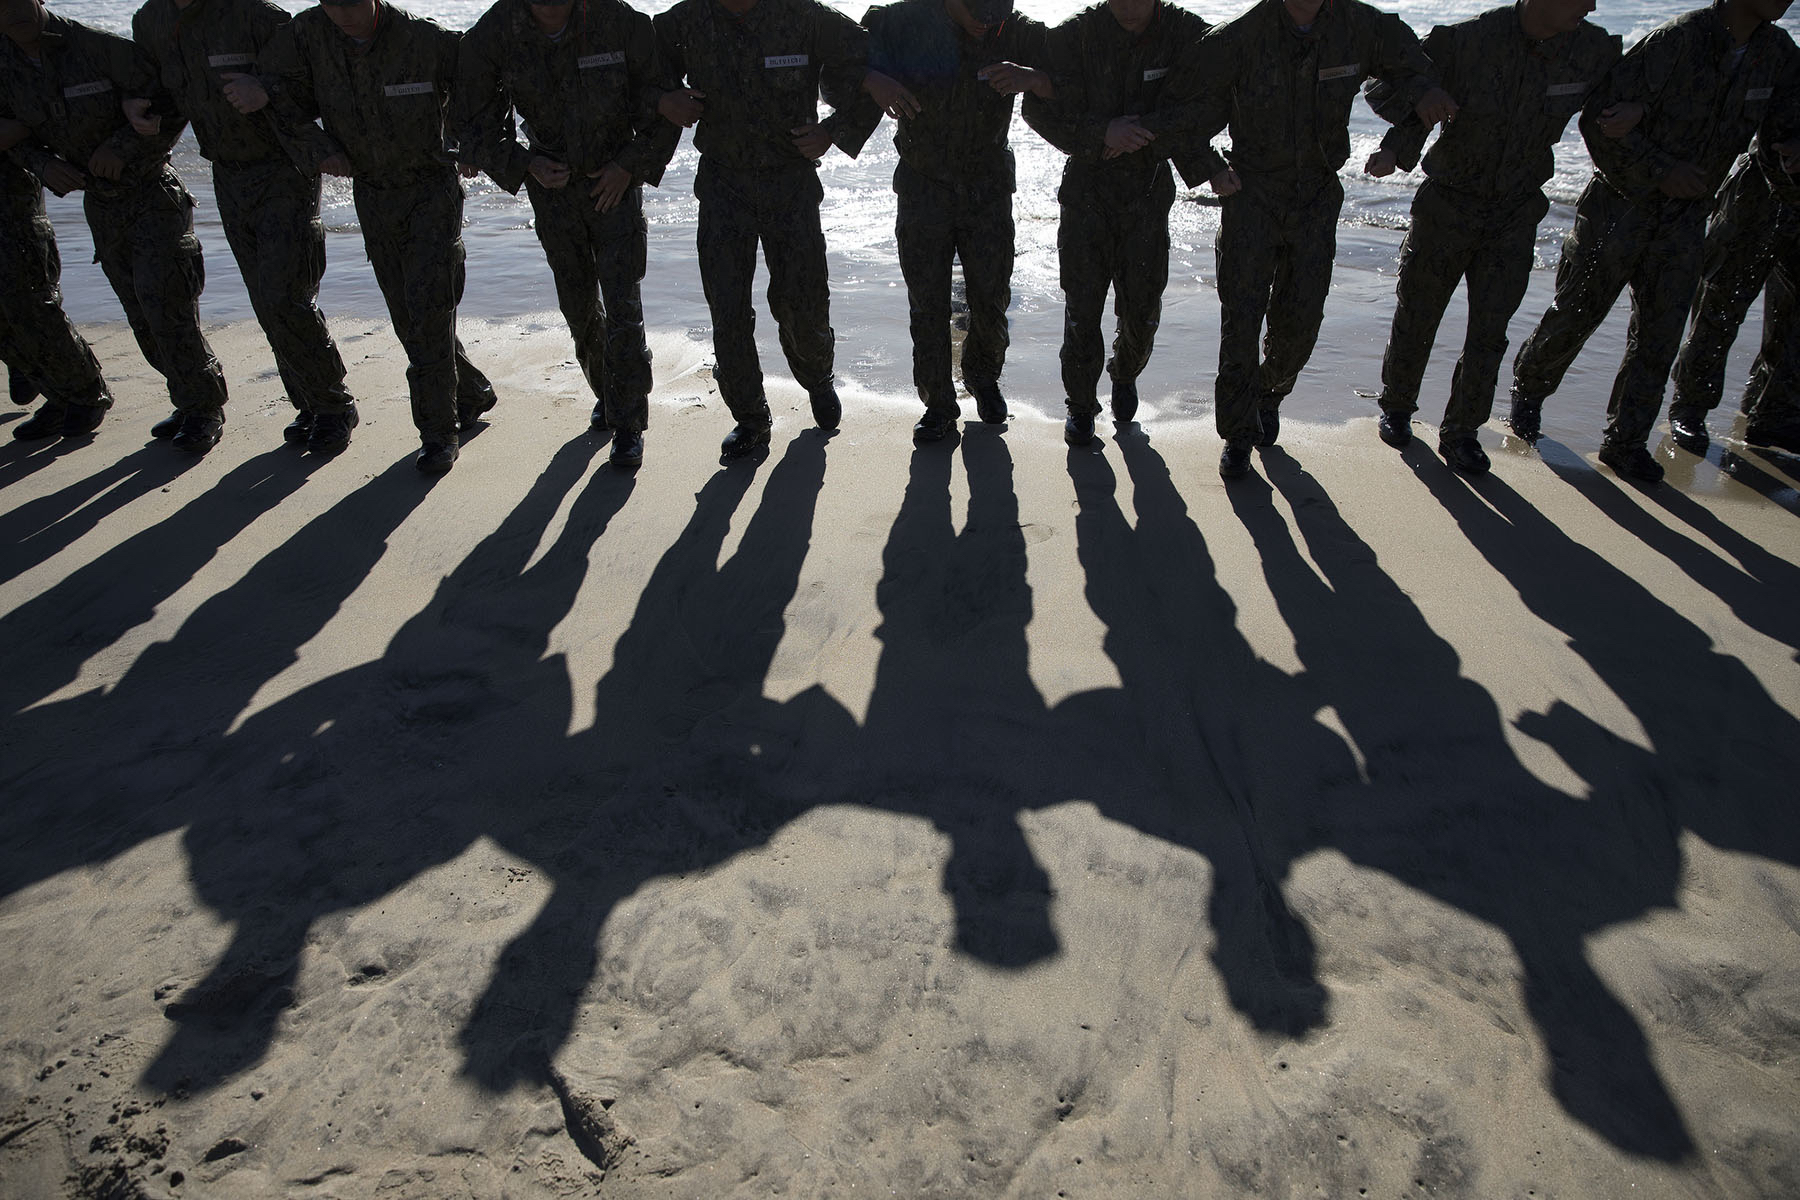 A row of Navy SEAL hopefuls standing arm in arm on a beach.